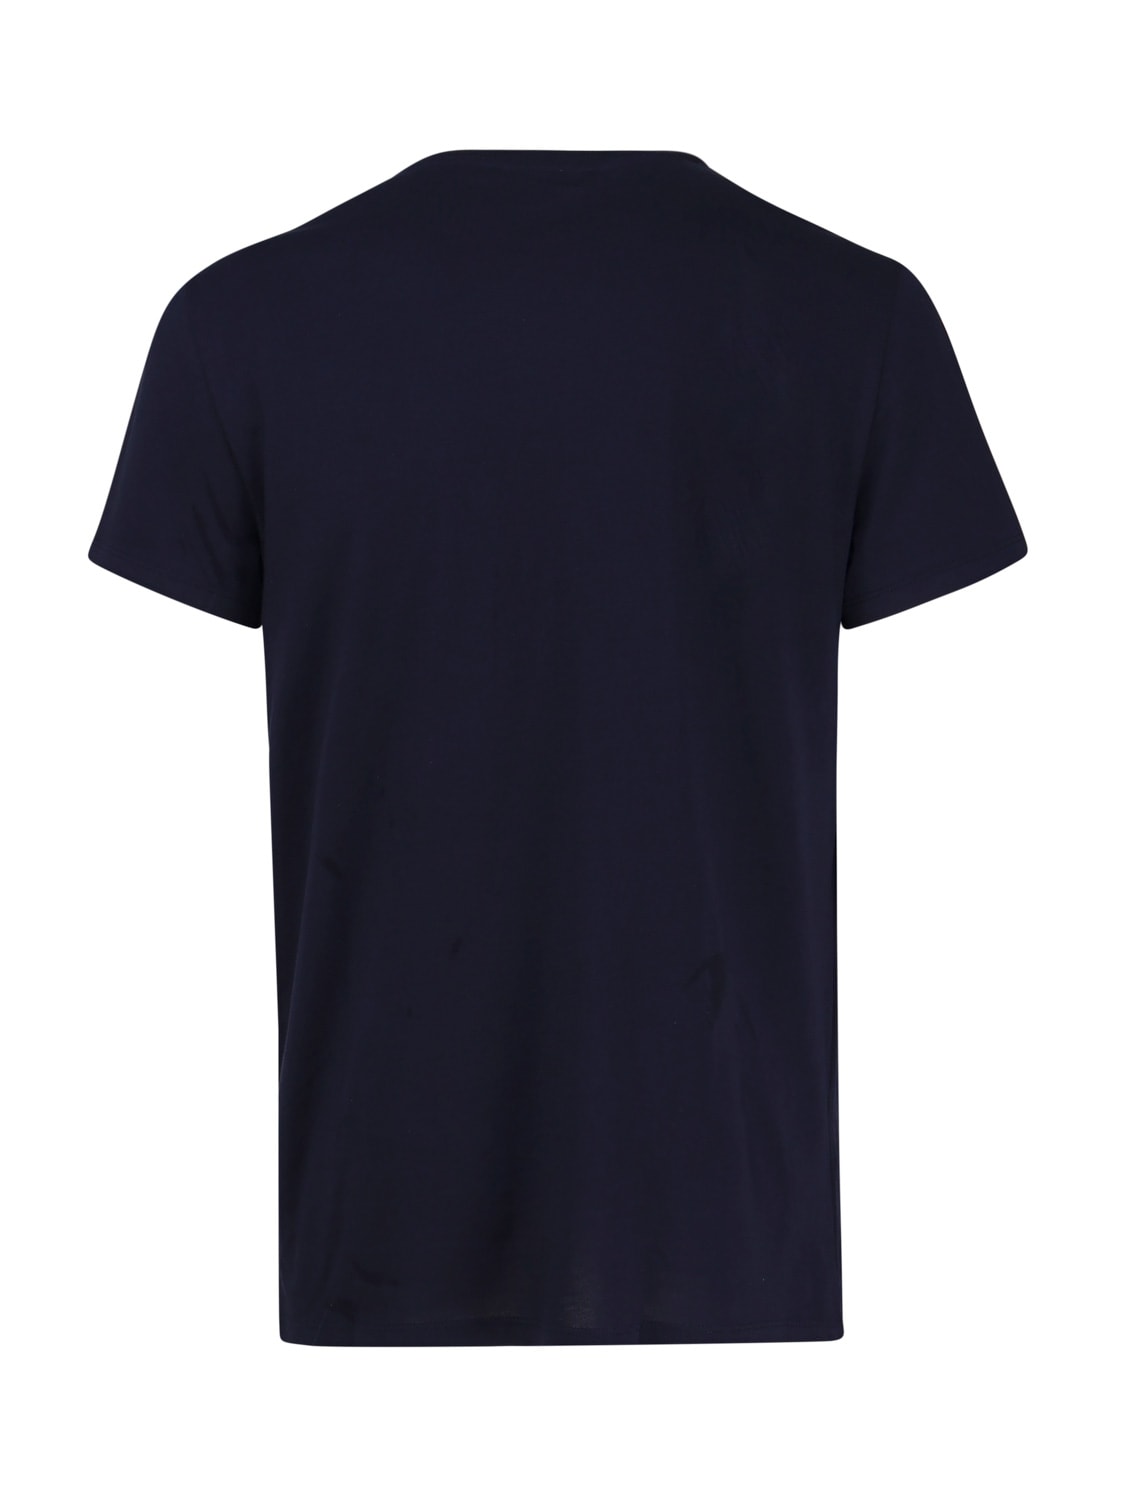 Shop Lacoste Navy Blue T-shirt In Cotton Jersey